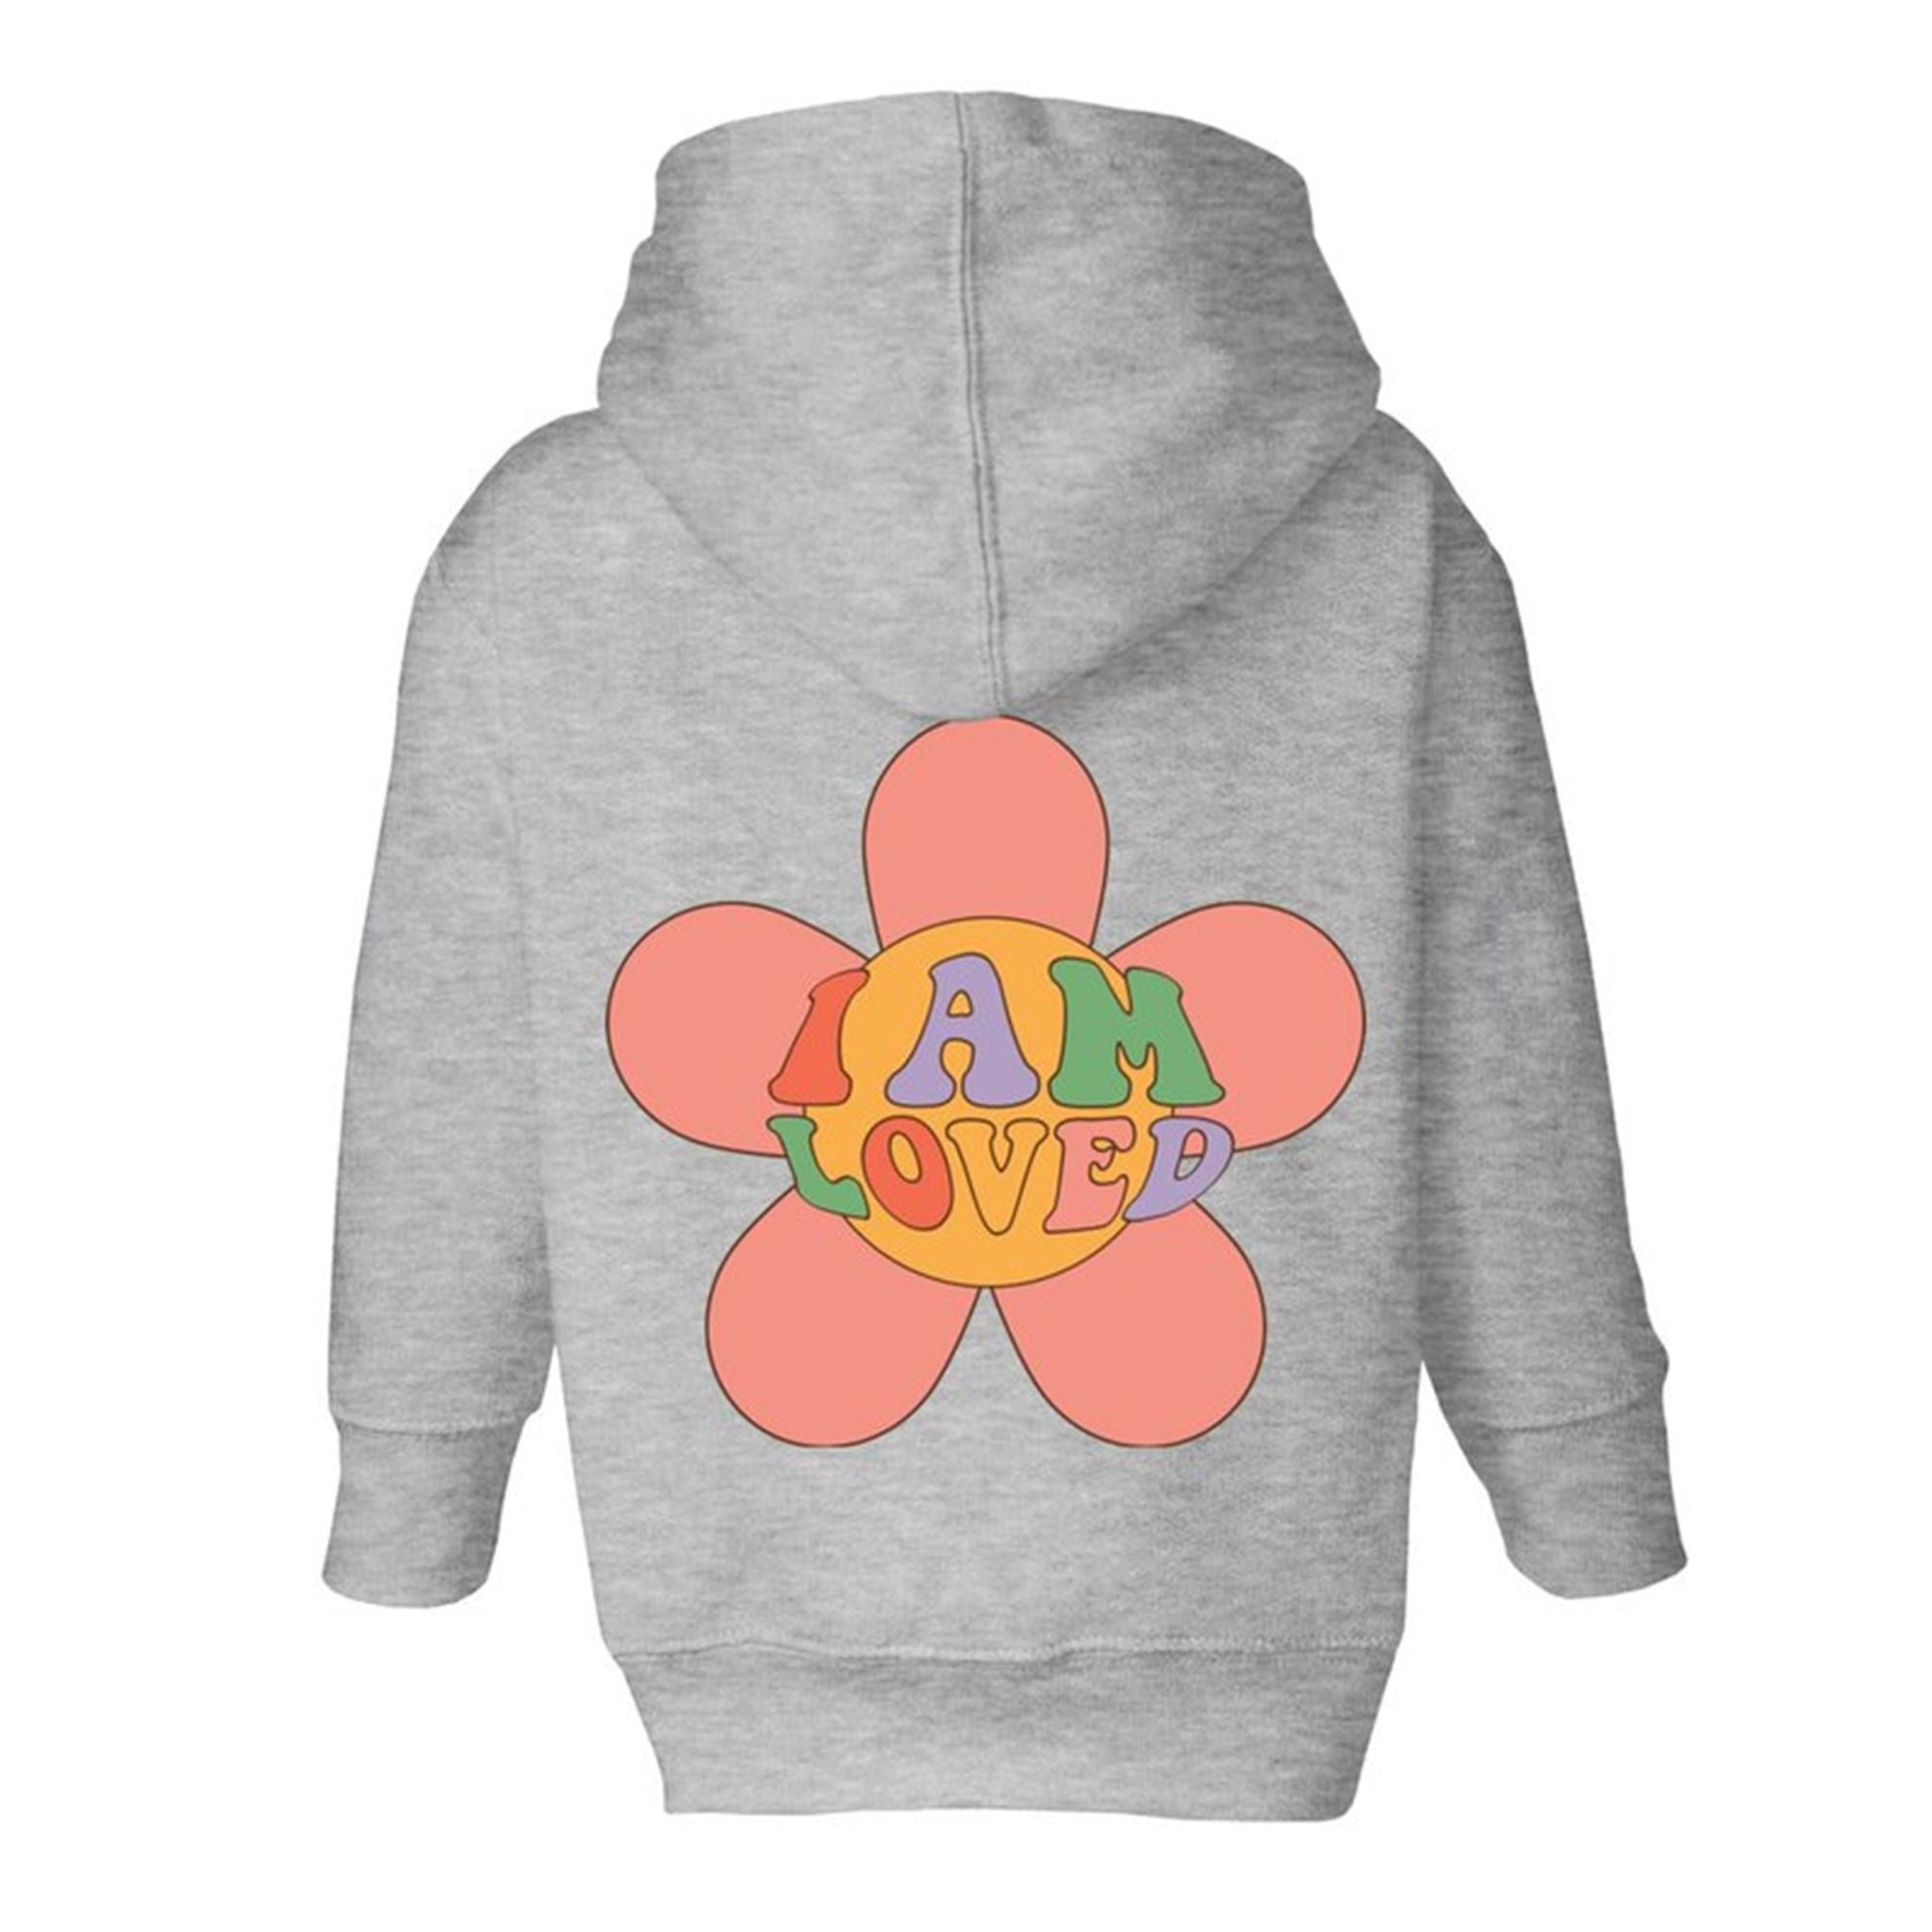 I Am Loved Toddler Jacket Full-Zip Fleece Hoodie Size: 2T Color: Heather Jesus Passion Apparel